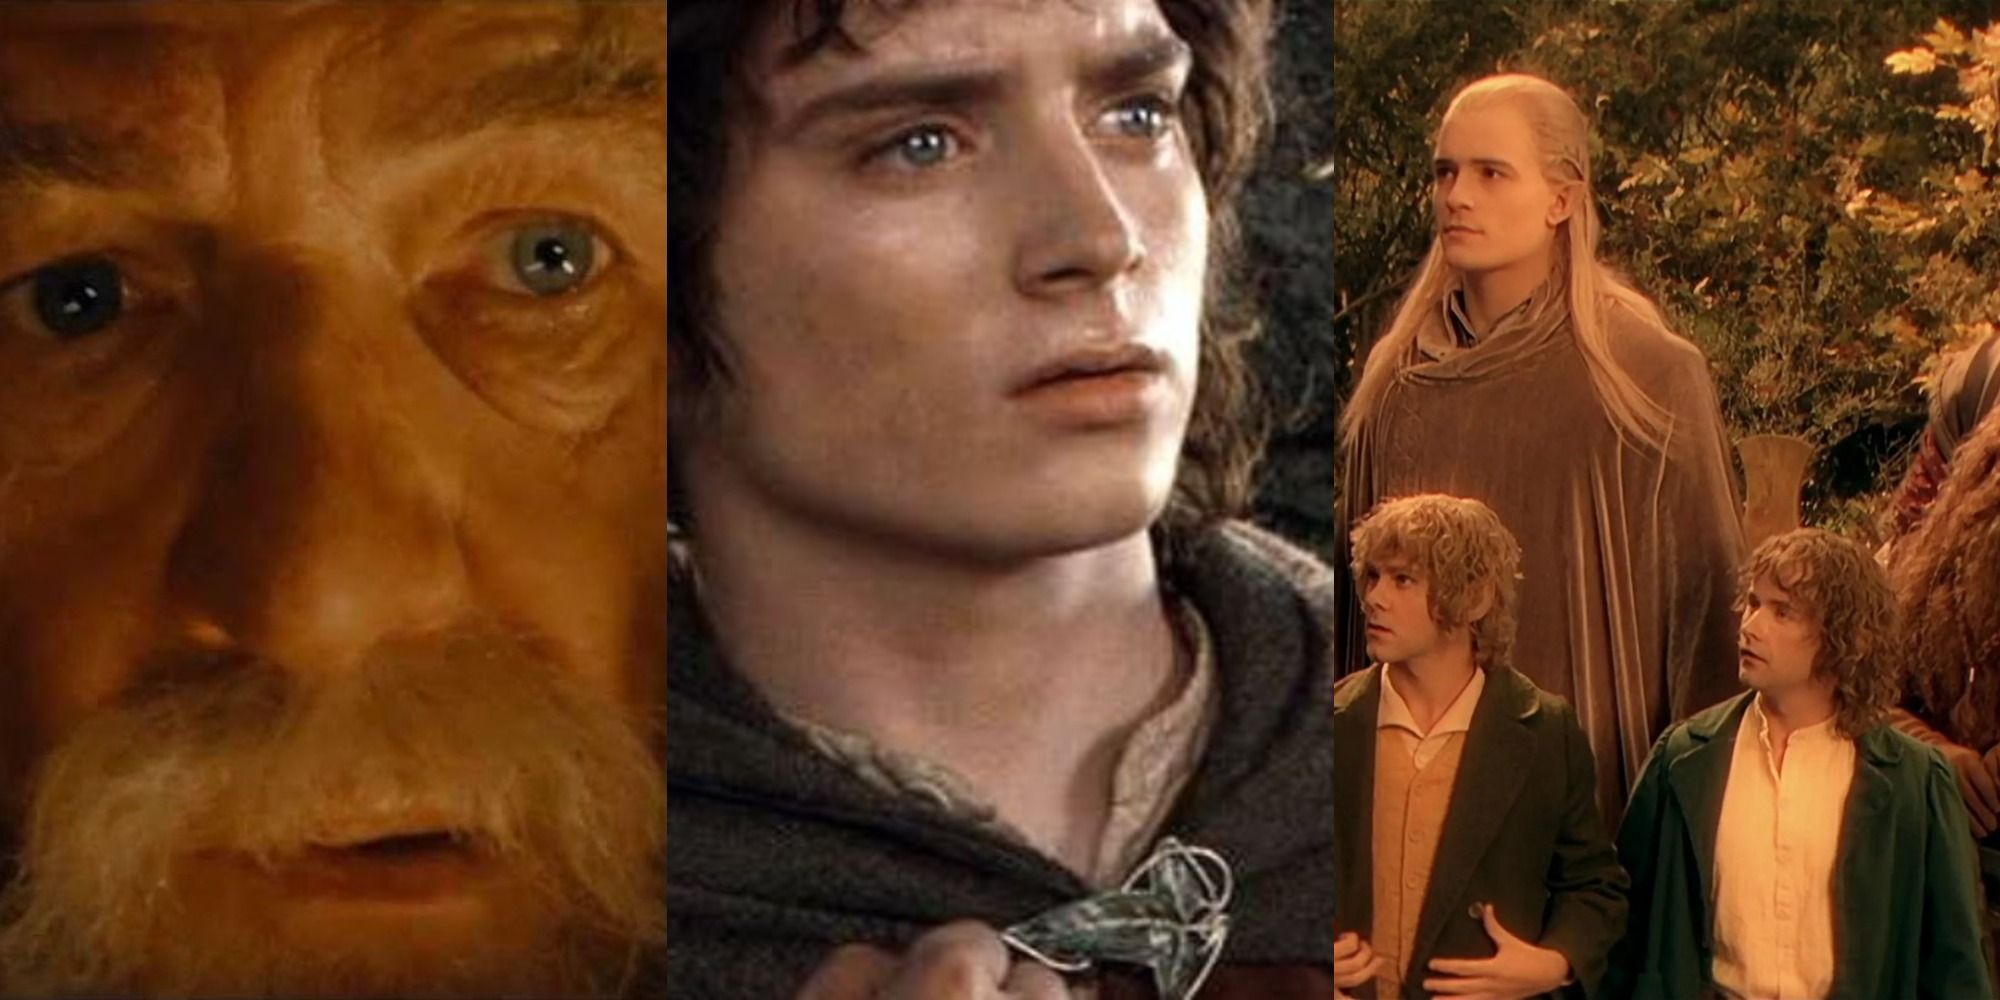 The Fellowship Of The Rings 20th Anniversary 20 Things You Didn’t Know About the Film